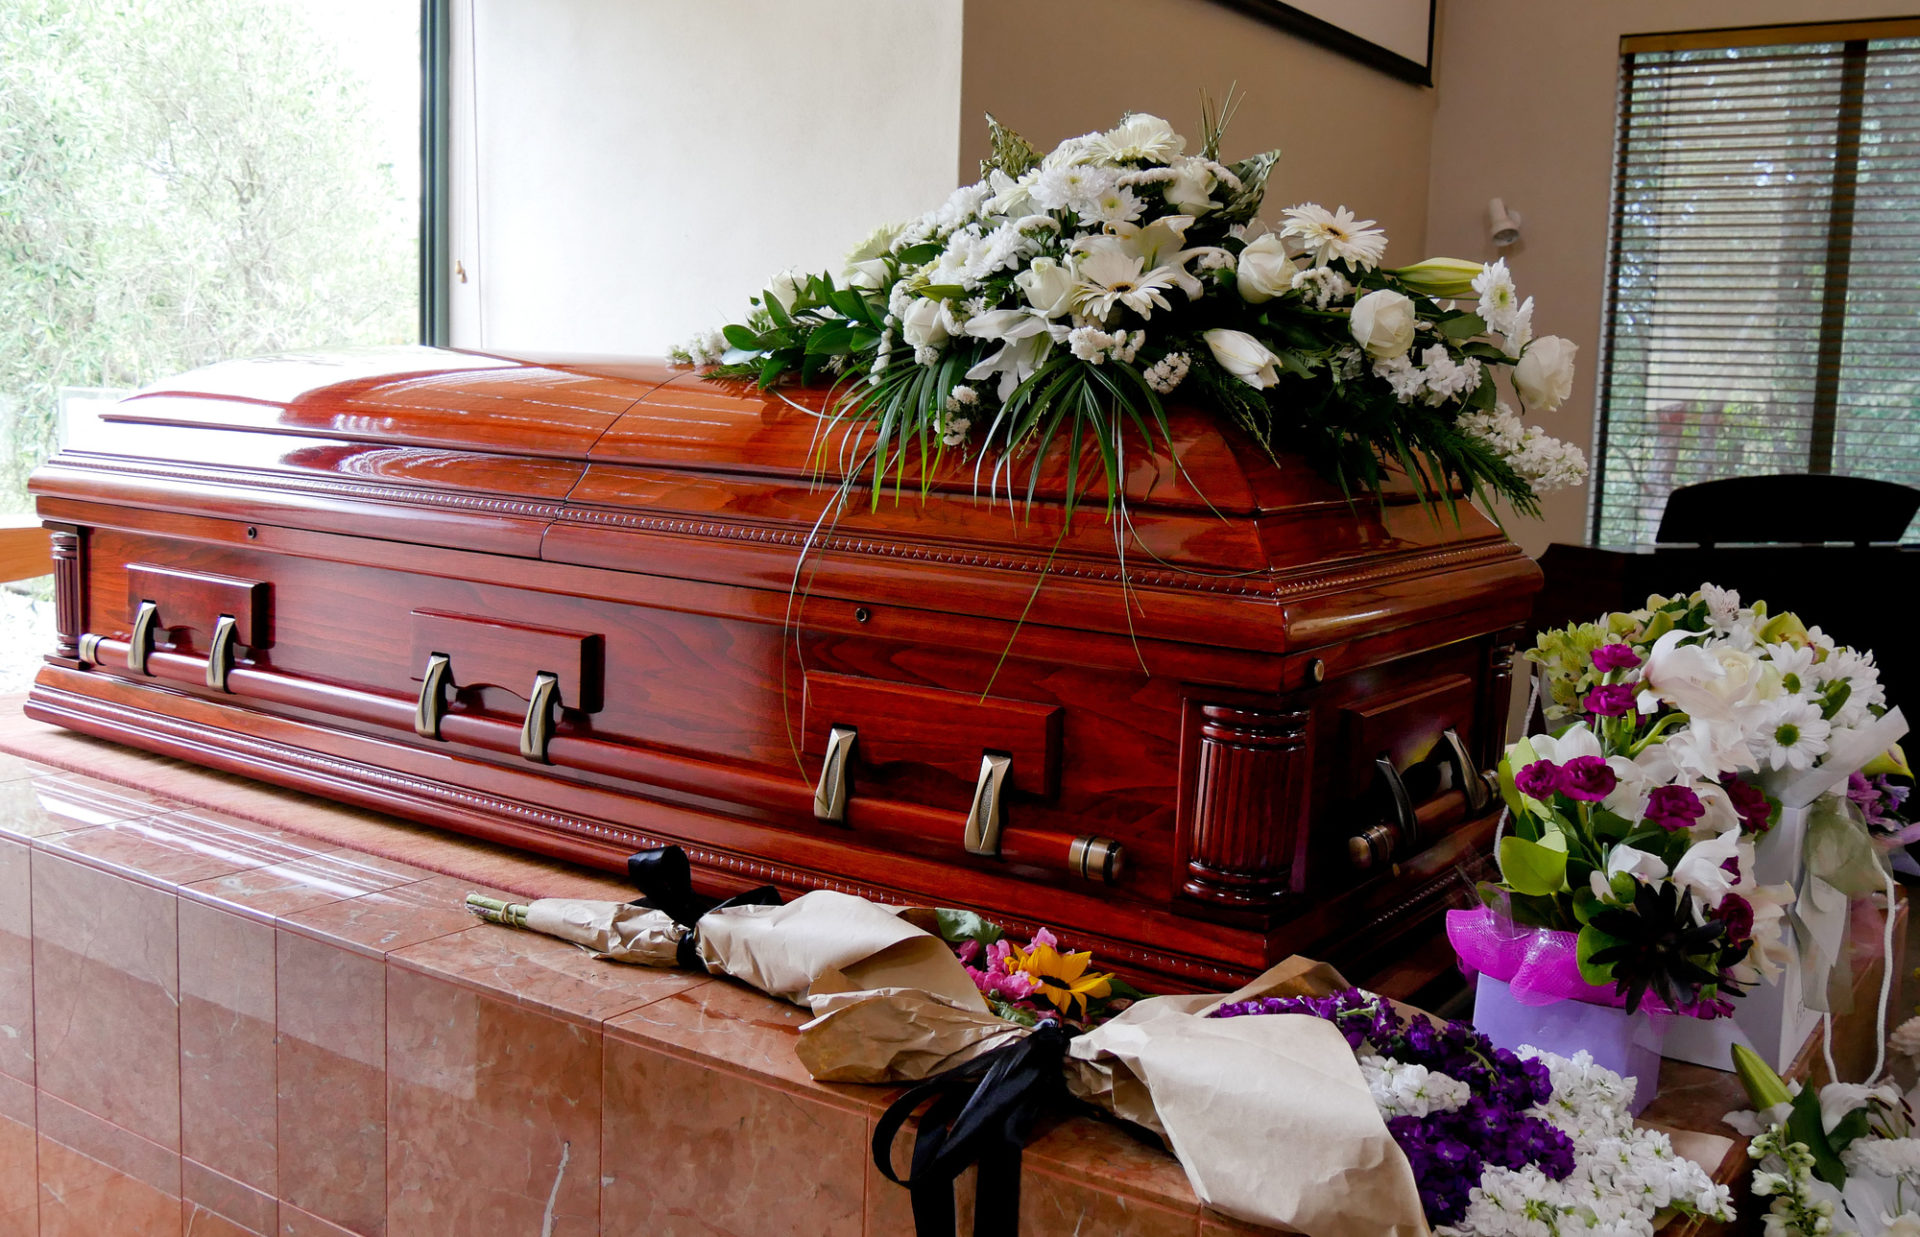 Coffin Prices: Why Do People Spend as Much on a Coffin as a Car?